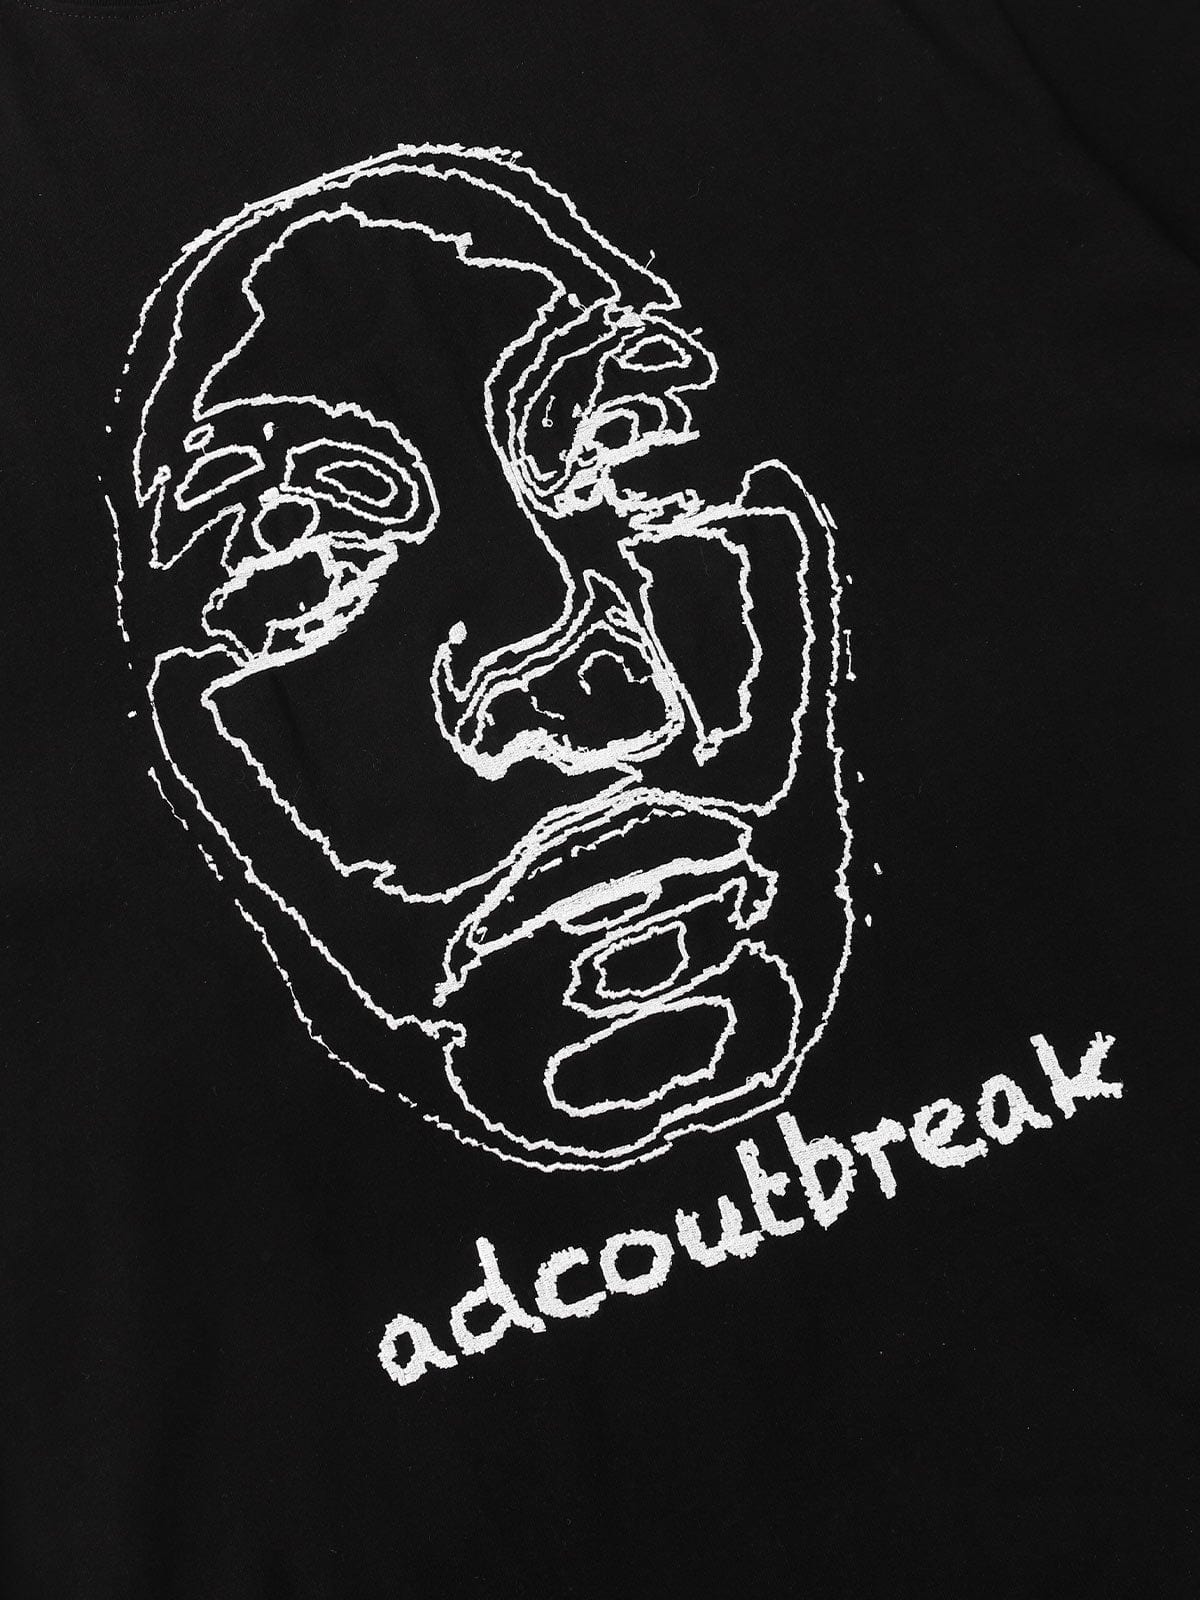 NEV Embroidery Abstract Face Tee